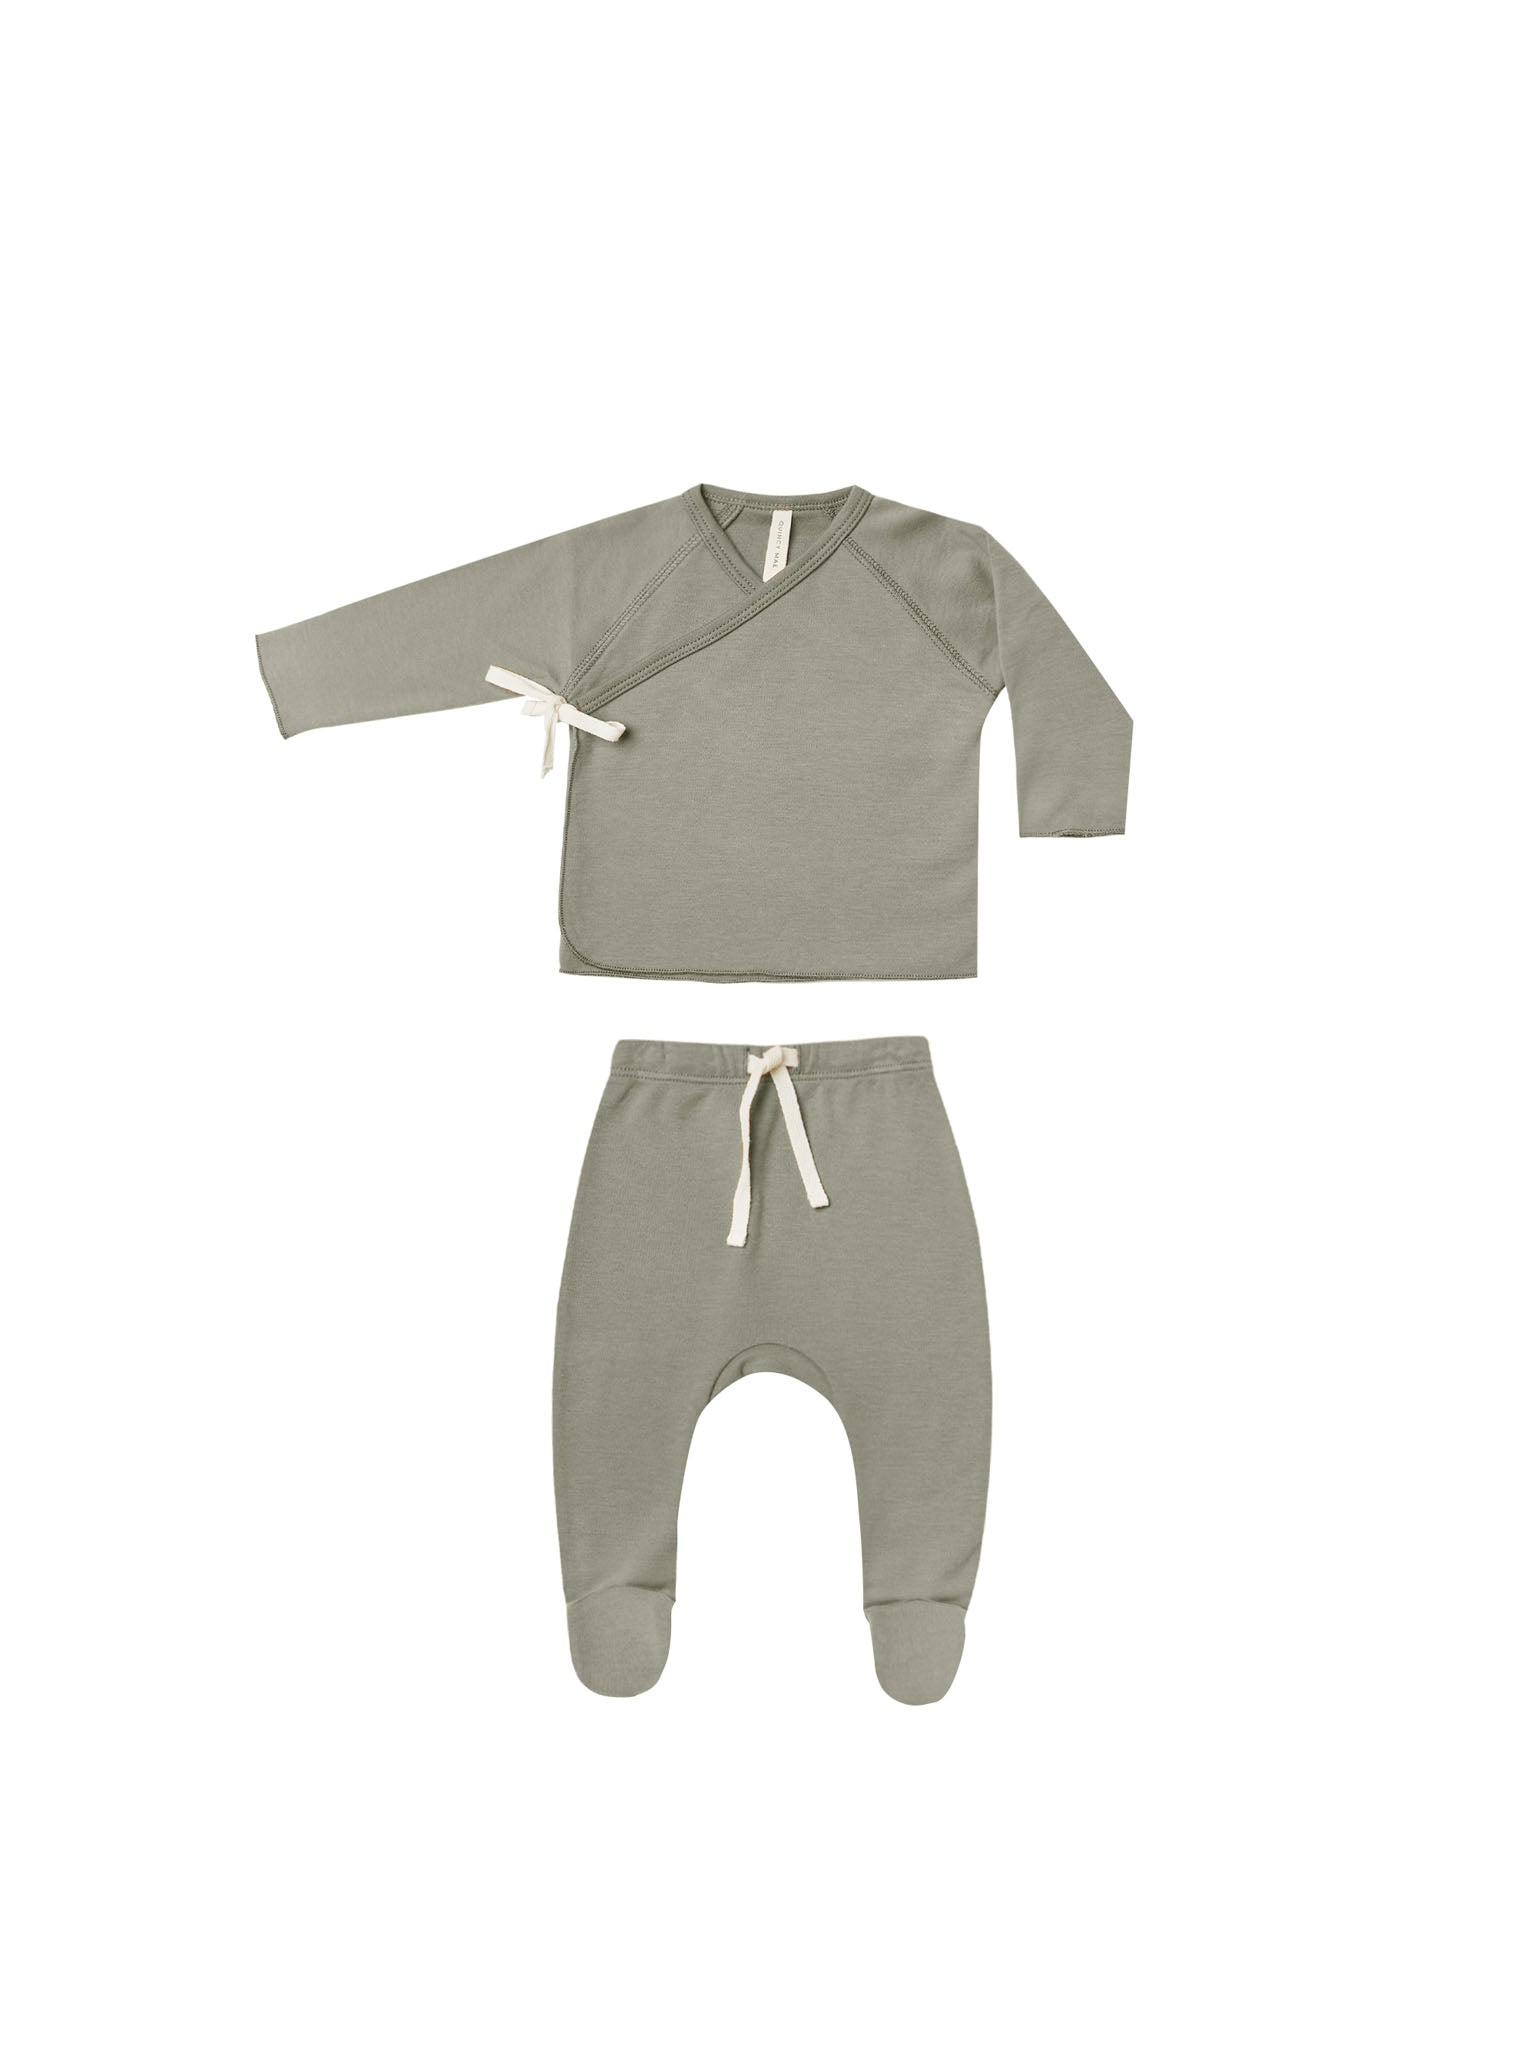 Wrap Top + Footed Pant Set | Basil - LAST ONE NB